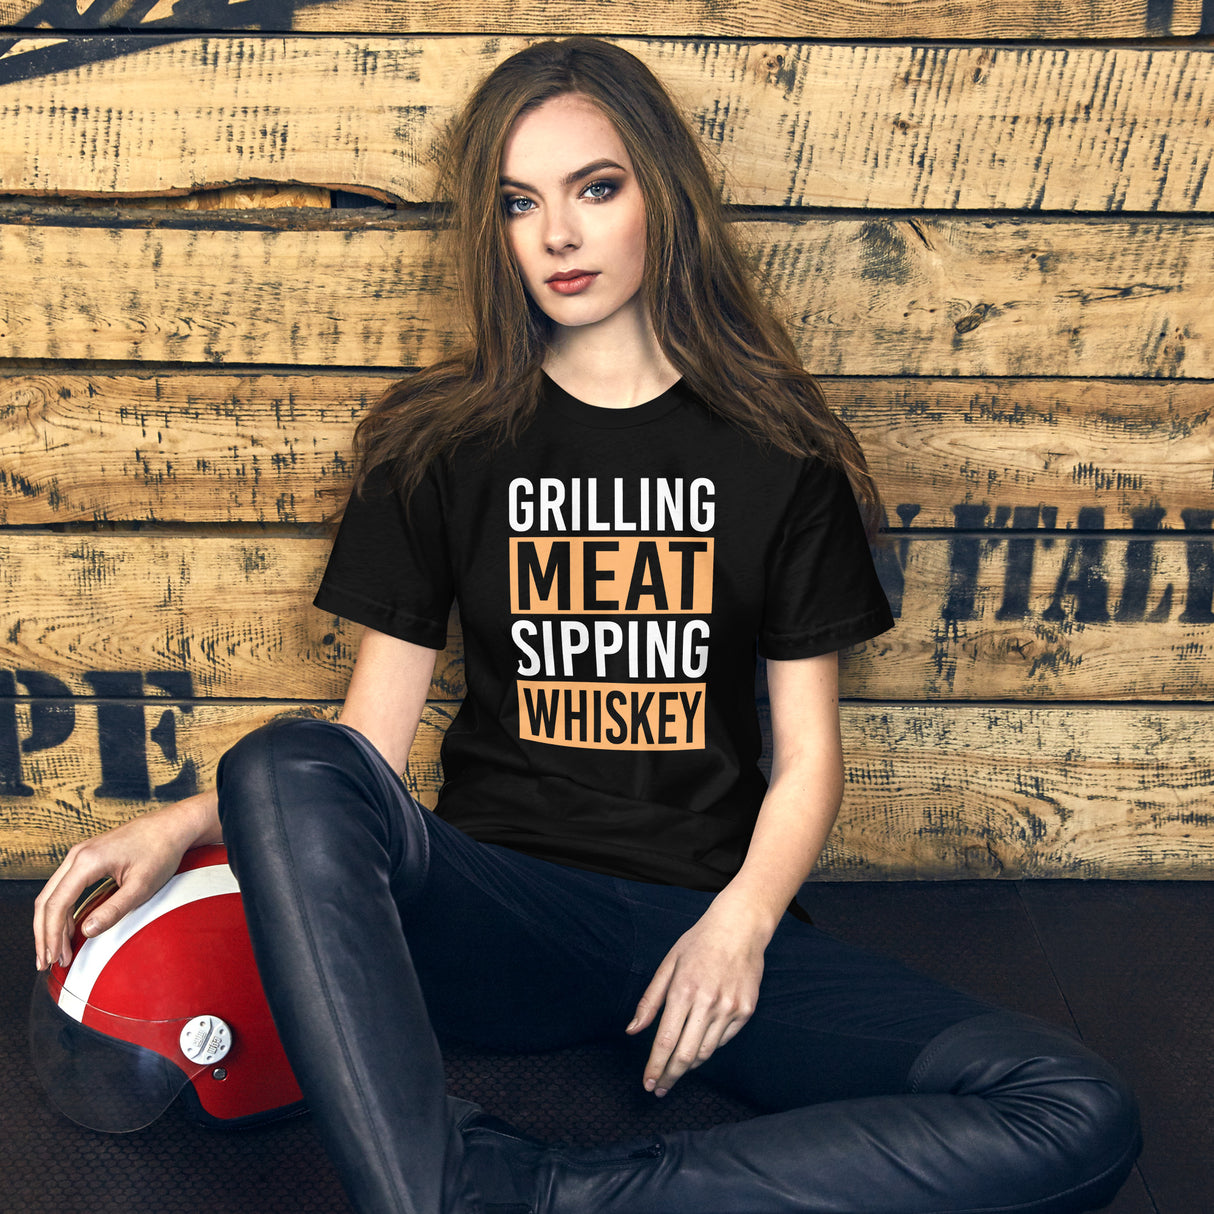 Grilling Meat Sipping Whiskey Women's Shirt